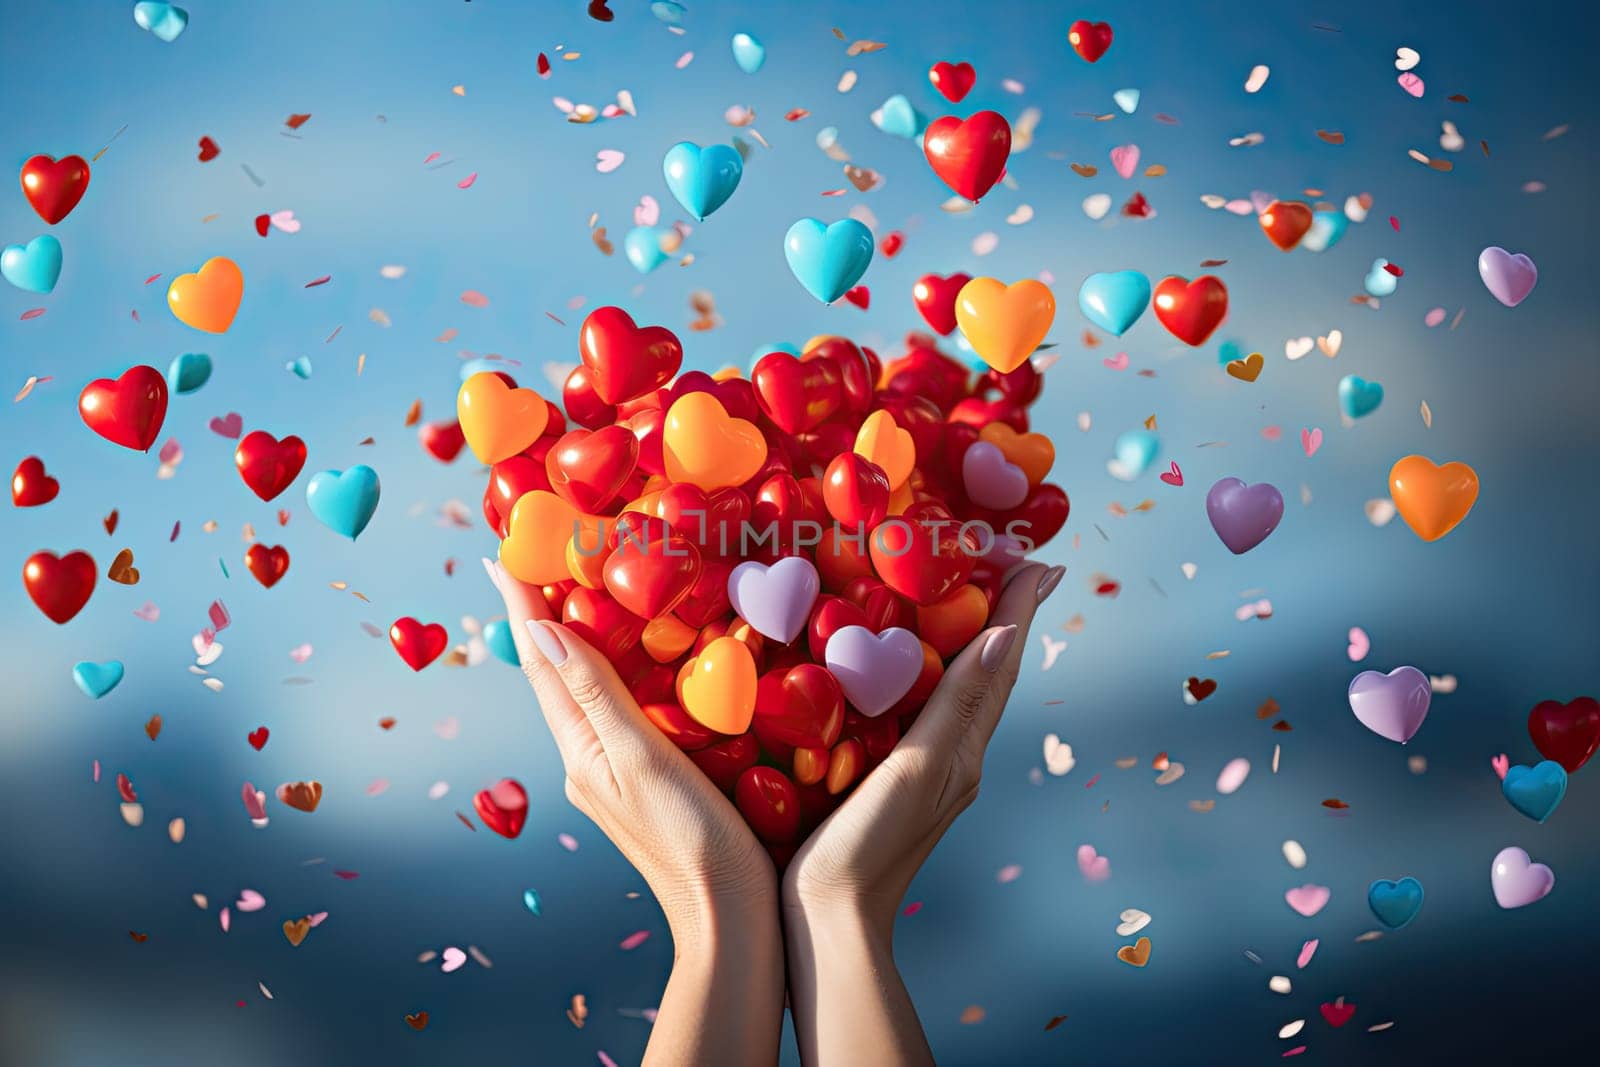 someone's hands holding a bunch of heart - shaped balloons in front of a blue sky filled with hearts